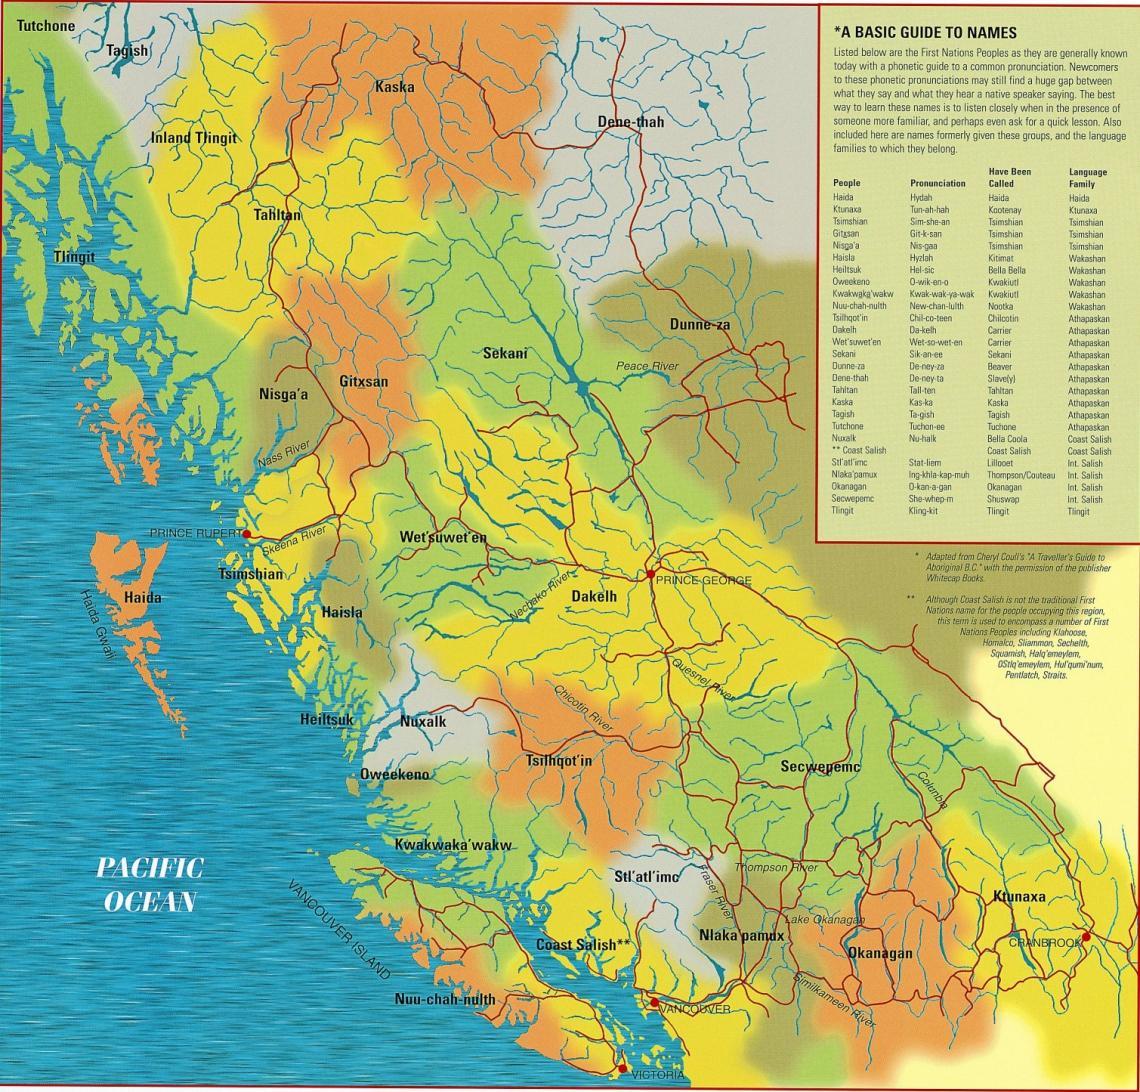 Represents boundaries of the various First Nations across British Columbia. Includes a basic pronunciation guide to names